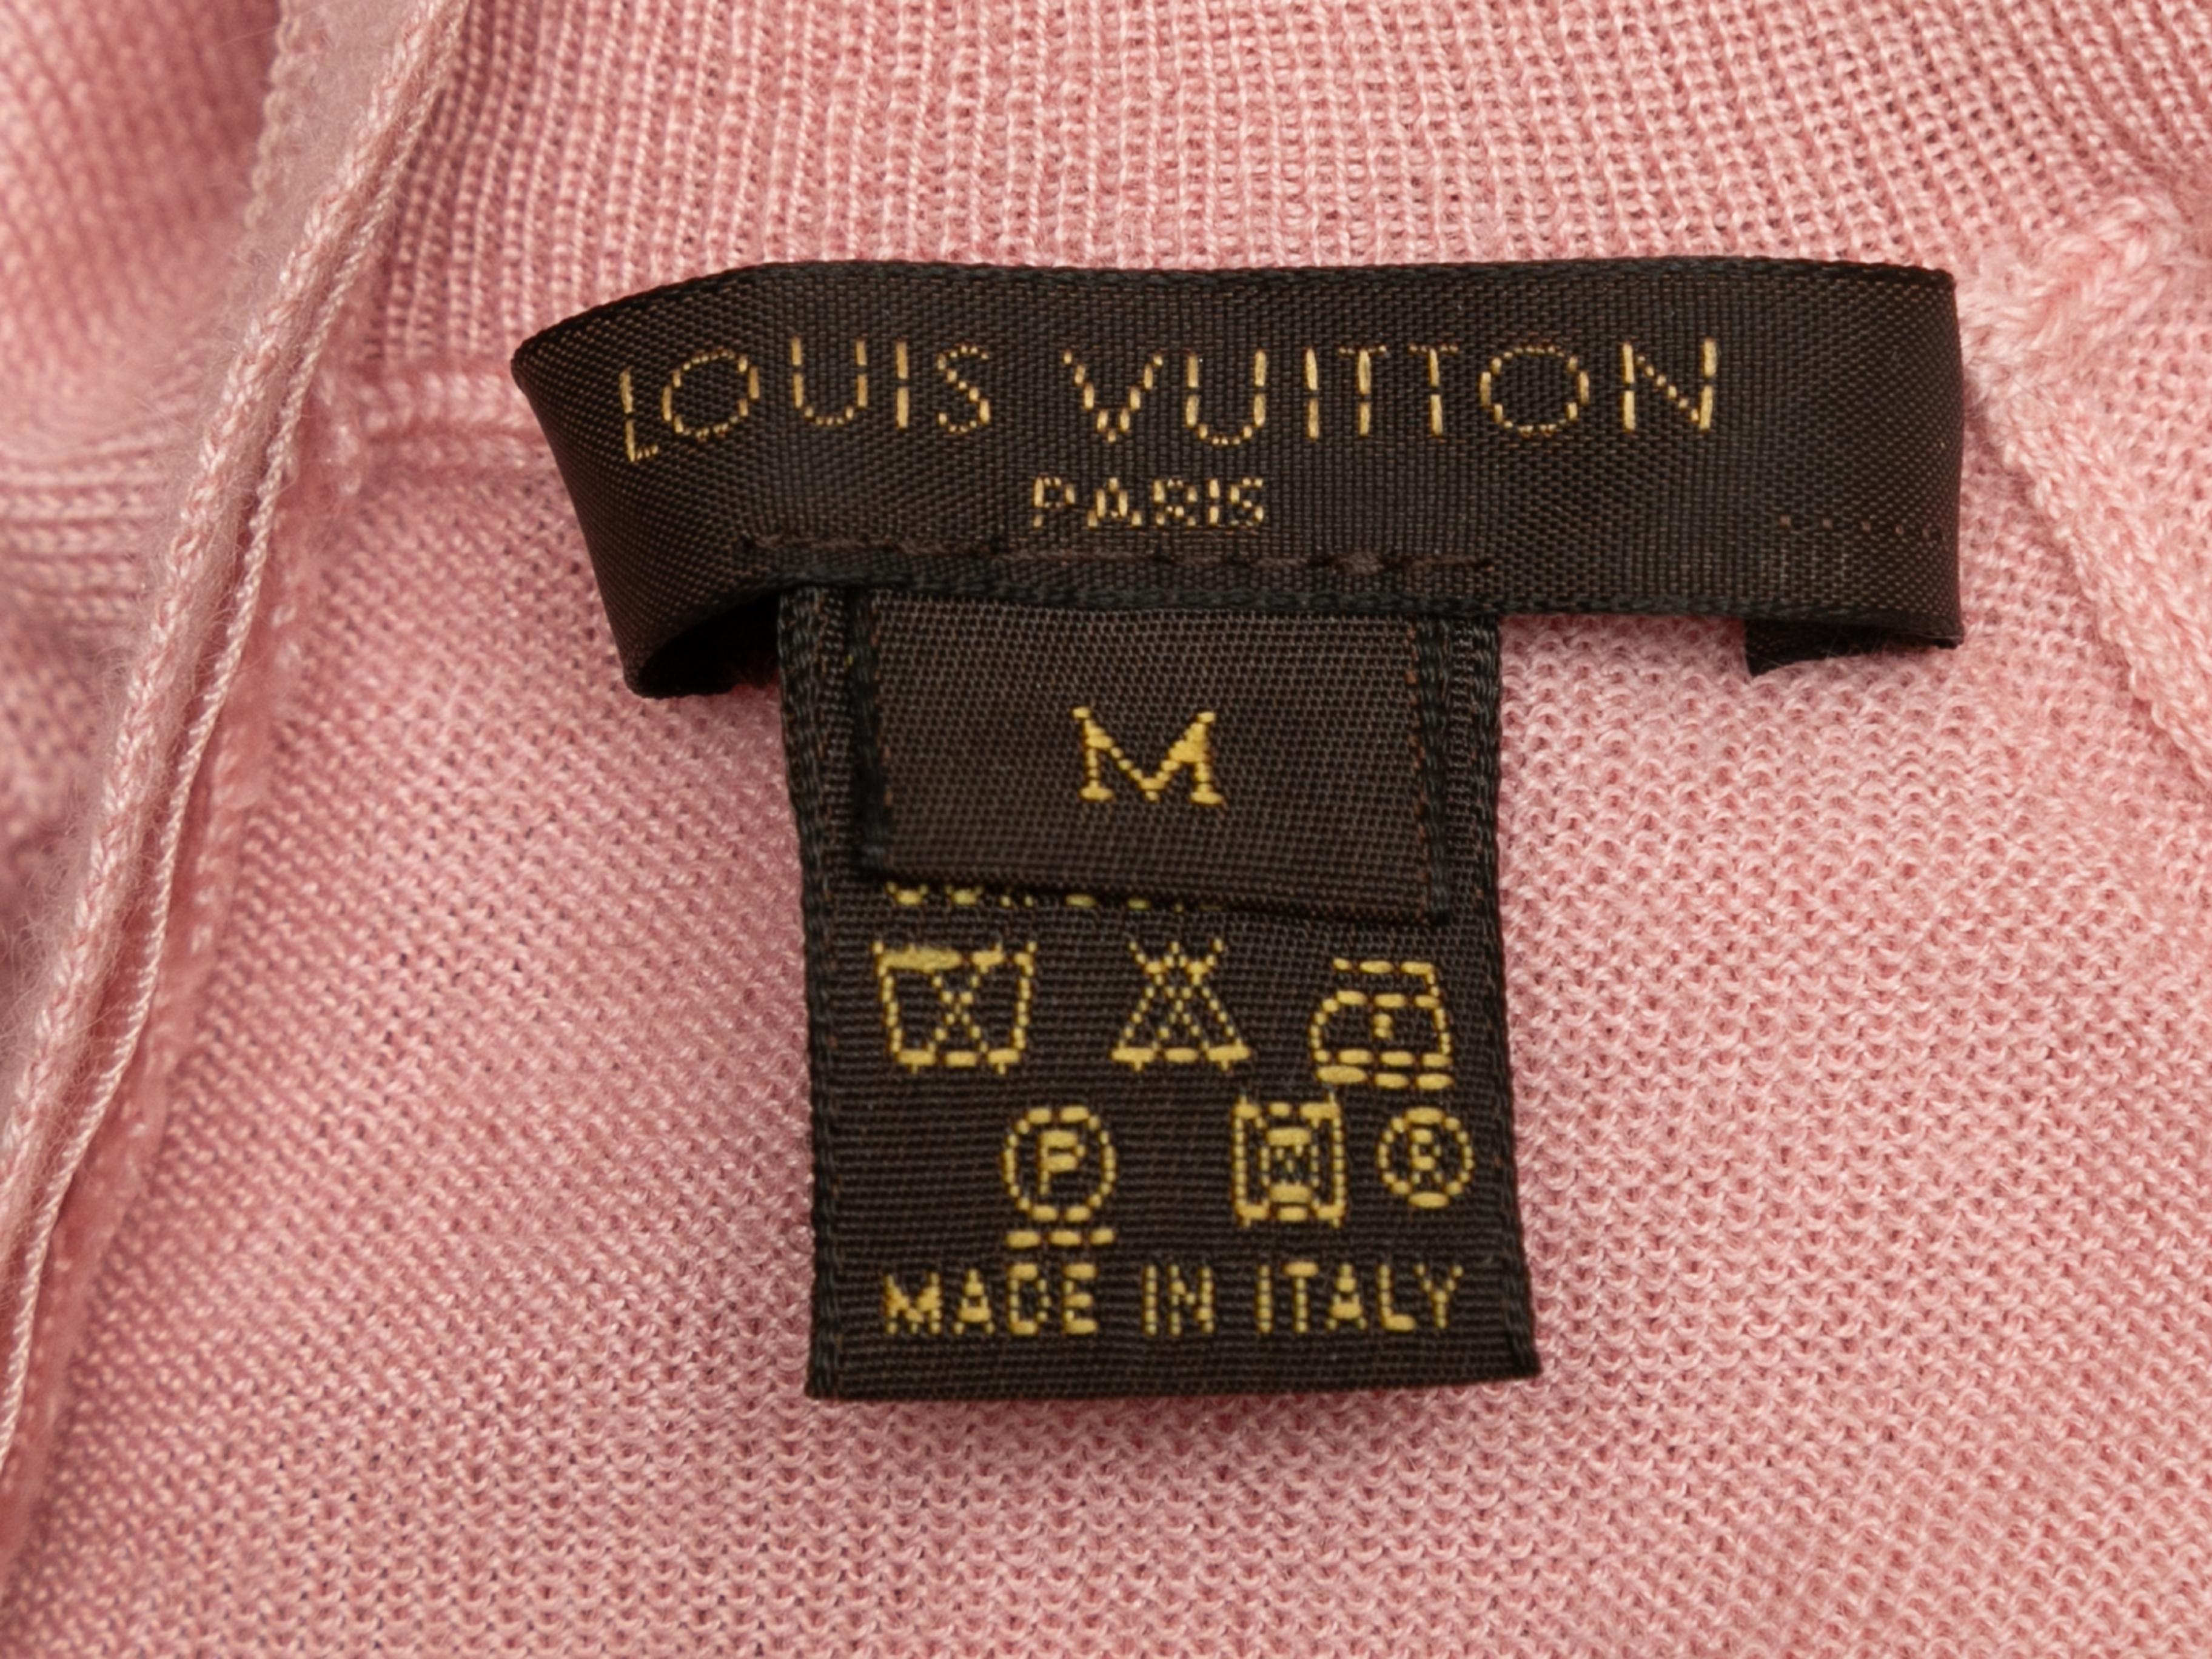 Light pink cashmere mock neck sweater by Louis Vuitton. Long sleeves. Zip closure at nape. 33